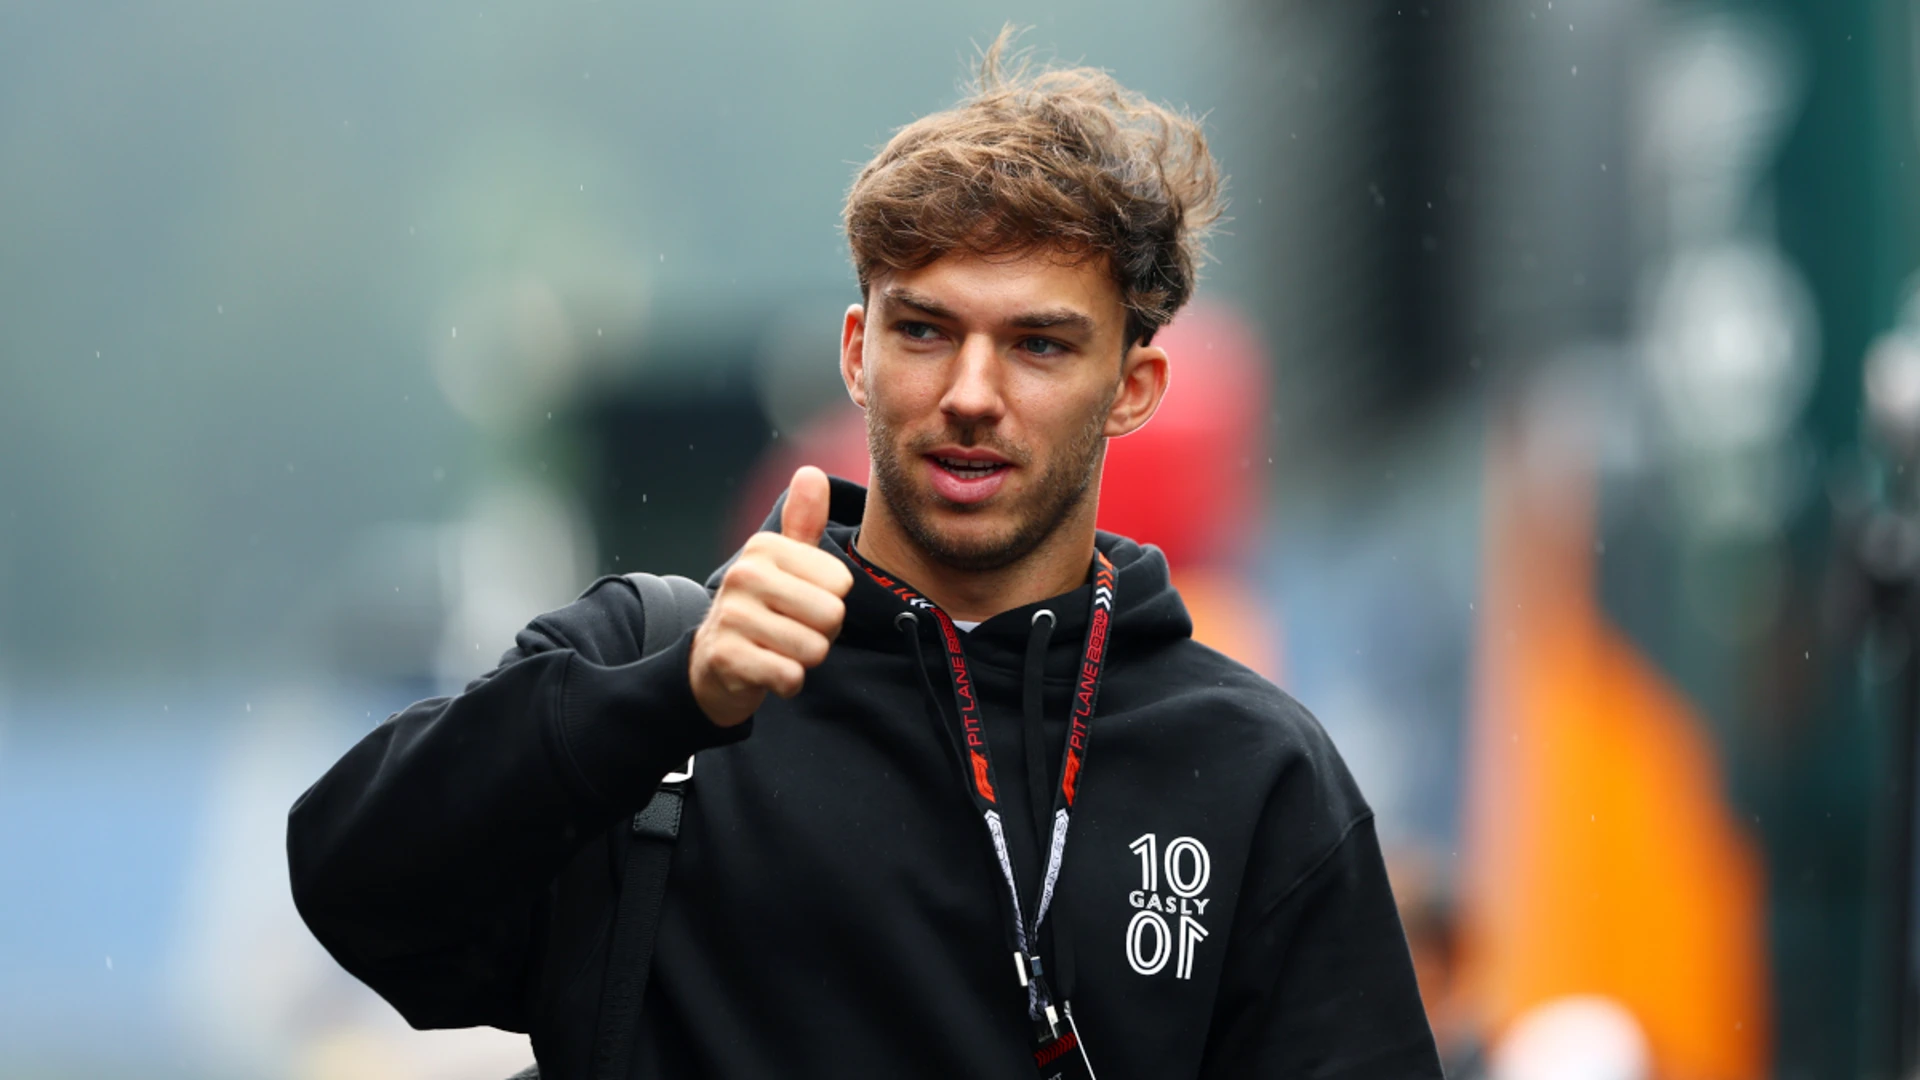 Gasly extends Alpine deal in 'challenging season'